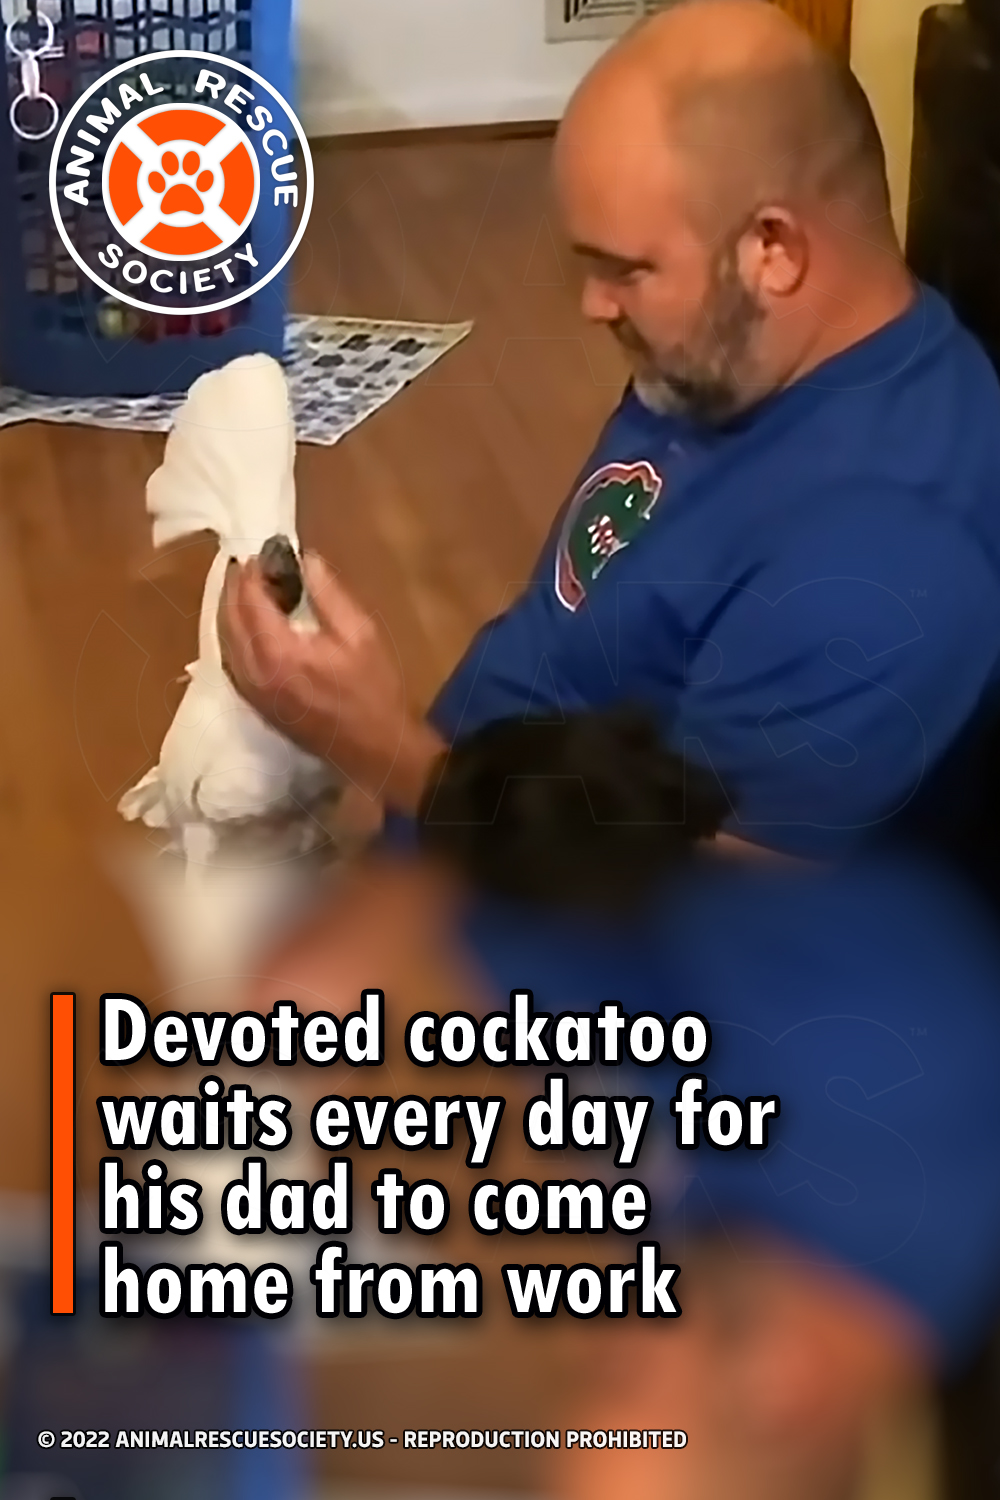 Devoted cockatoo waits every day for his dad to come home from work